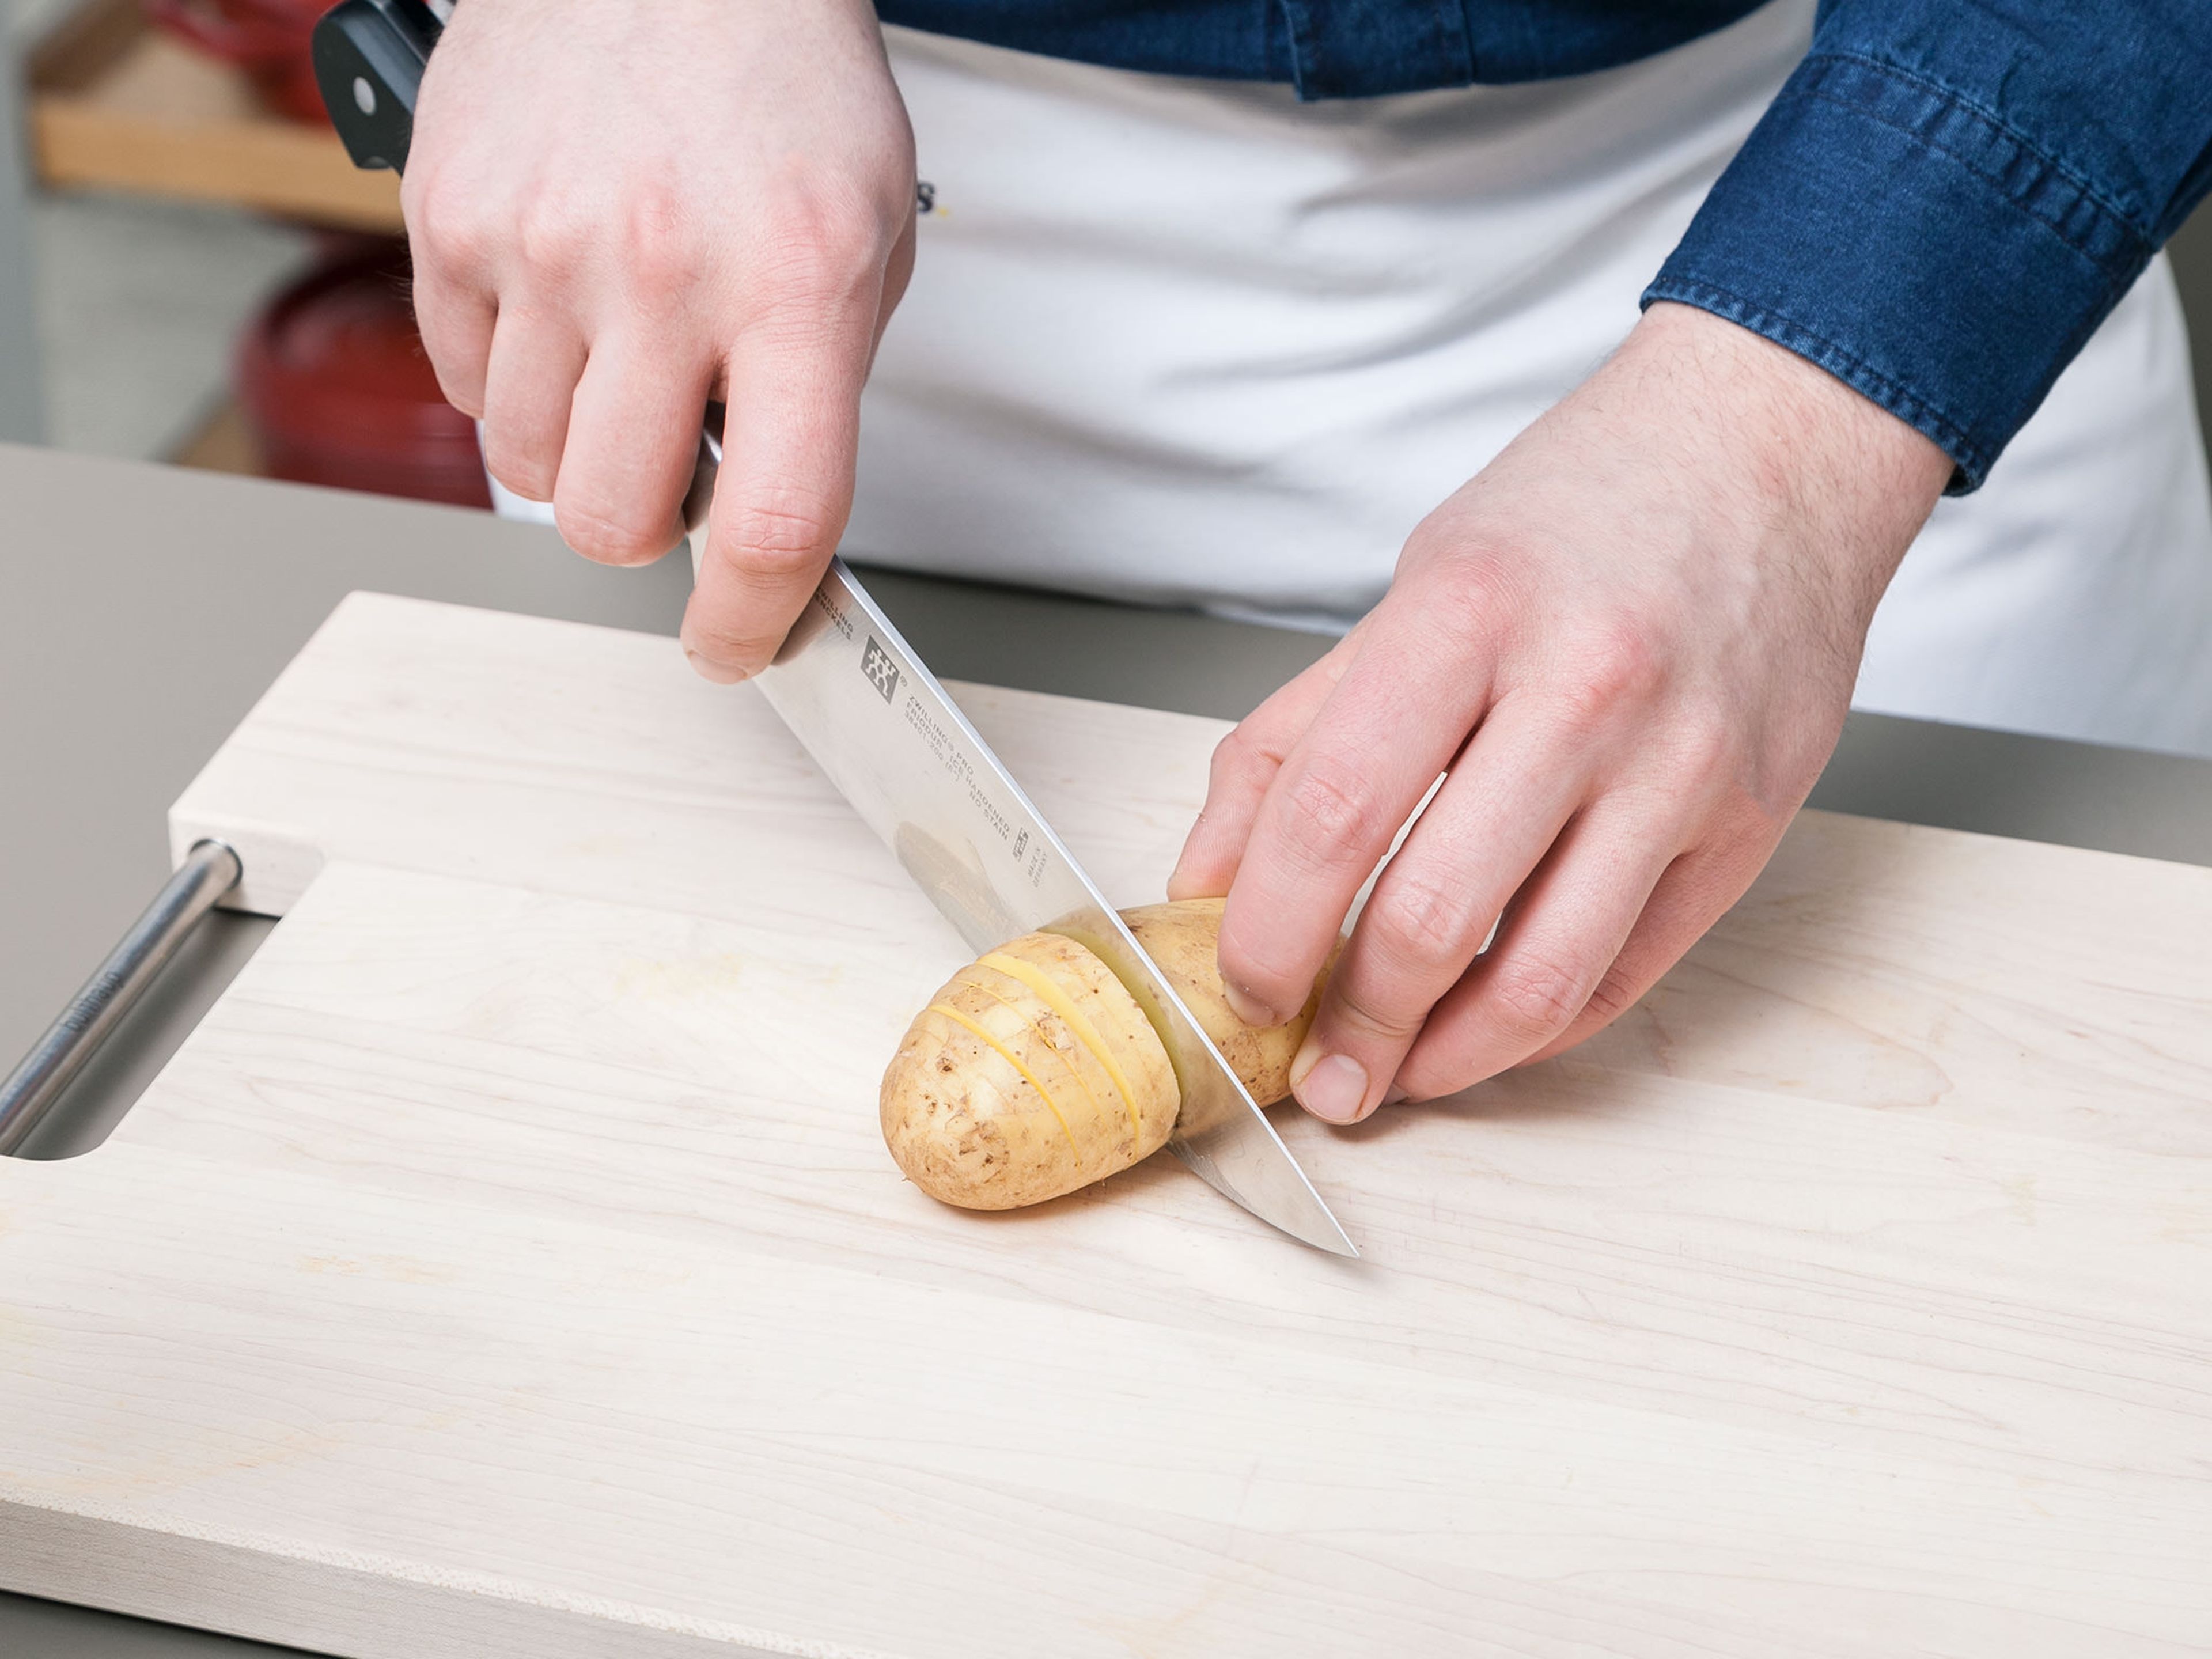 Preheat oven with convection to 180°C/360°F. Wash and dry potatoes. With a sharp knife, make thin cuts along the potatoes. Make sure not to cut all the way through the potatoes, so the bottom remains intact.